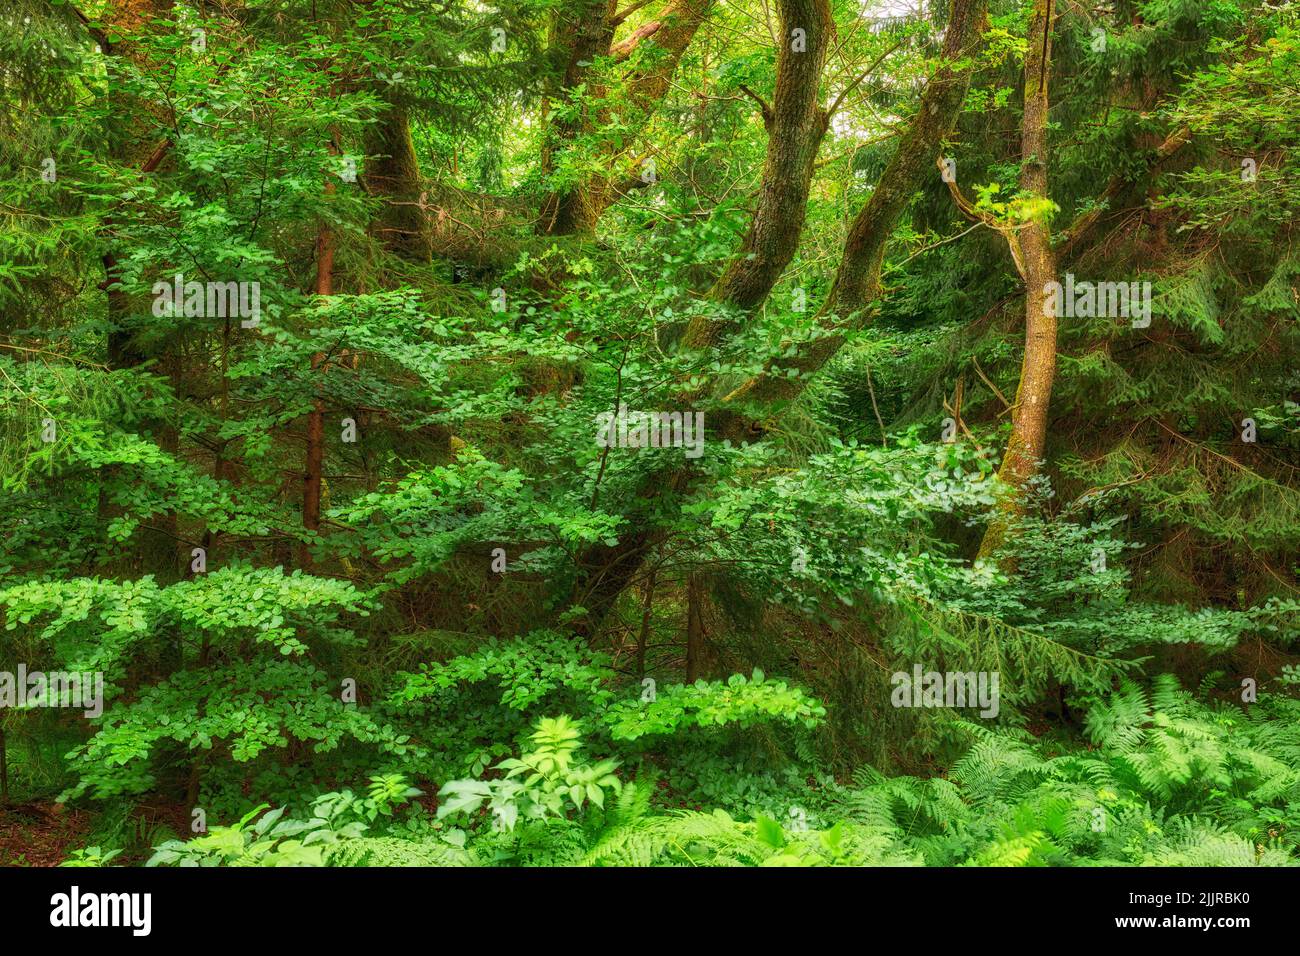 Green, lush and tropical forest with trees, plants and shrubs for a nature background. Landscape of wilderness, environment and ecosystem outdoors Stock Photo